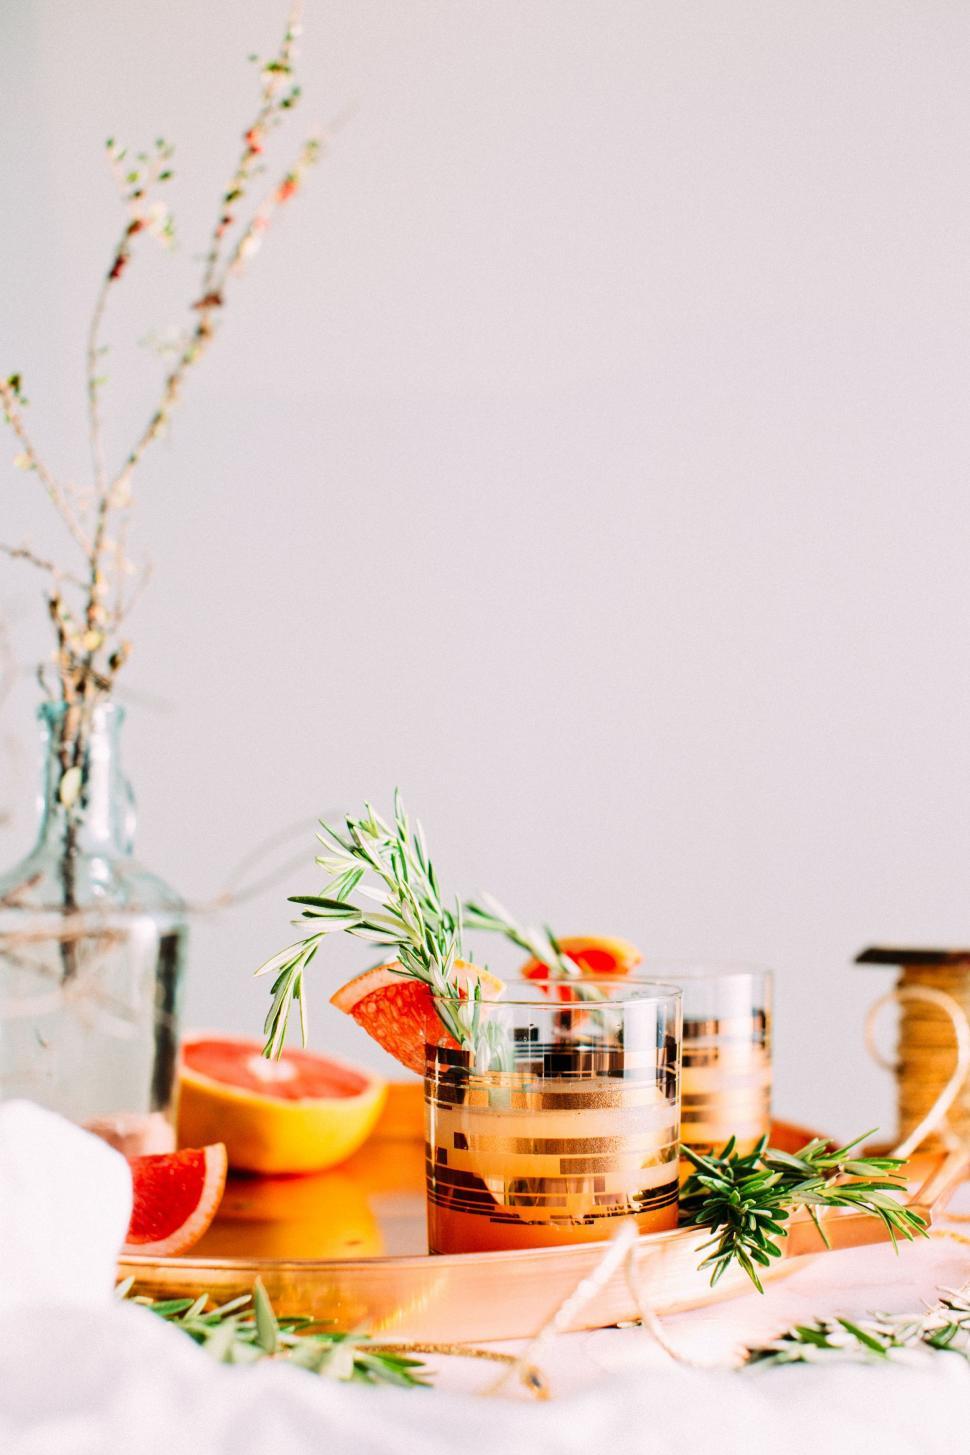 Free Image of Table With Oranges and Vase of Flowers 